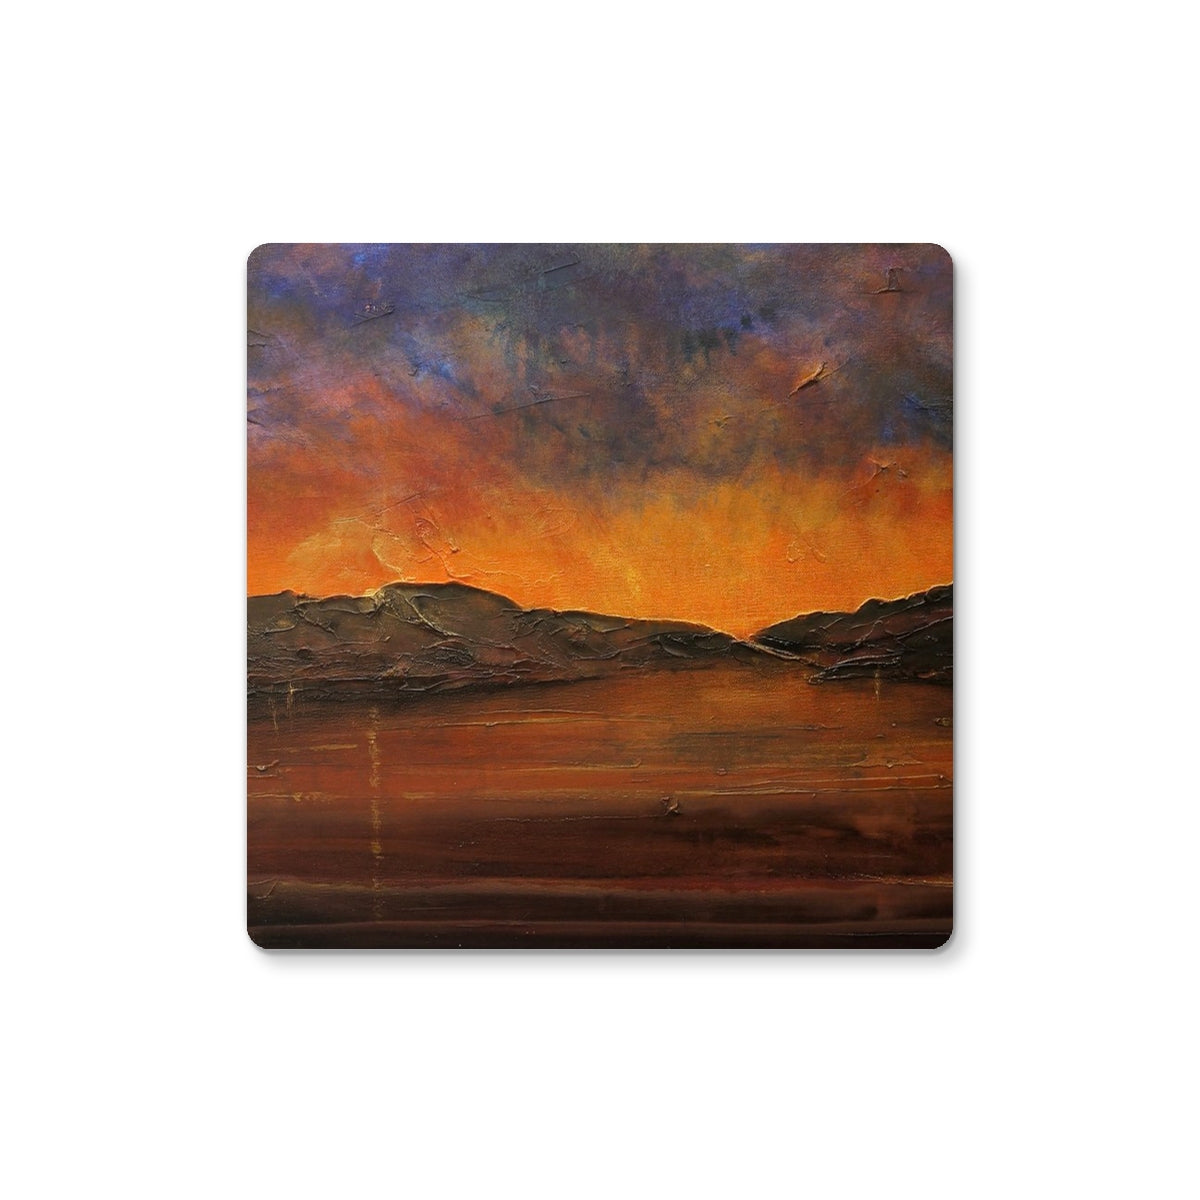 A Brooding Clyde Dusk Art Gifts Coaster-Homeware-River Clyde Art Gallery-2 Coasters-Paintings, Prints, Homeware, Art Gifts From Scotland By Scottish Artist Kevin Hunter